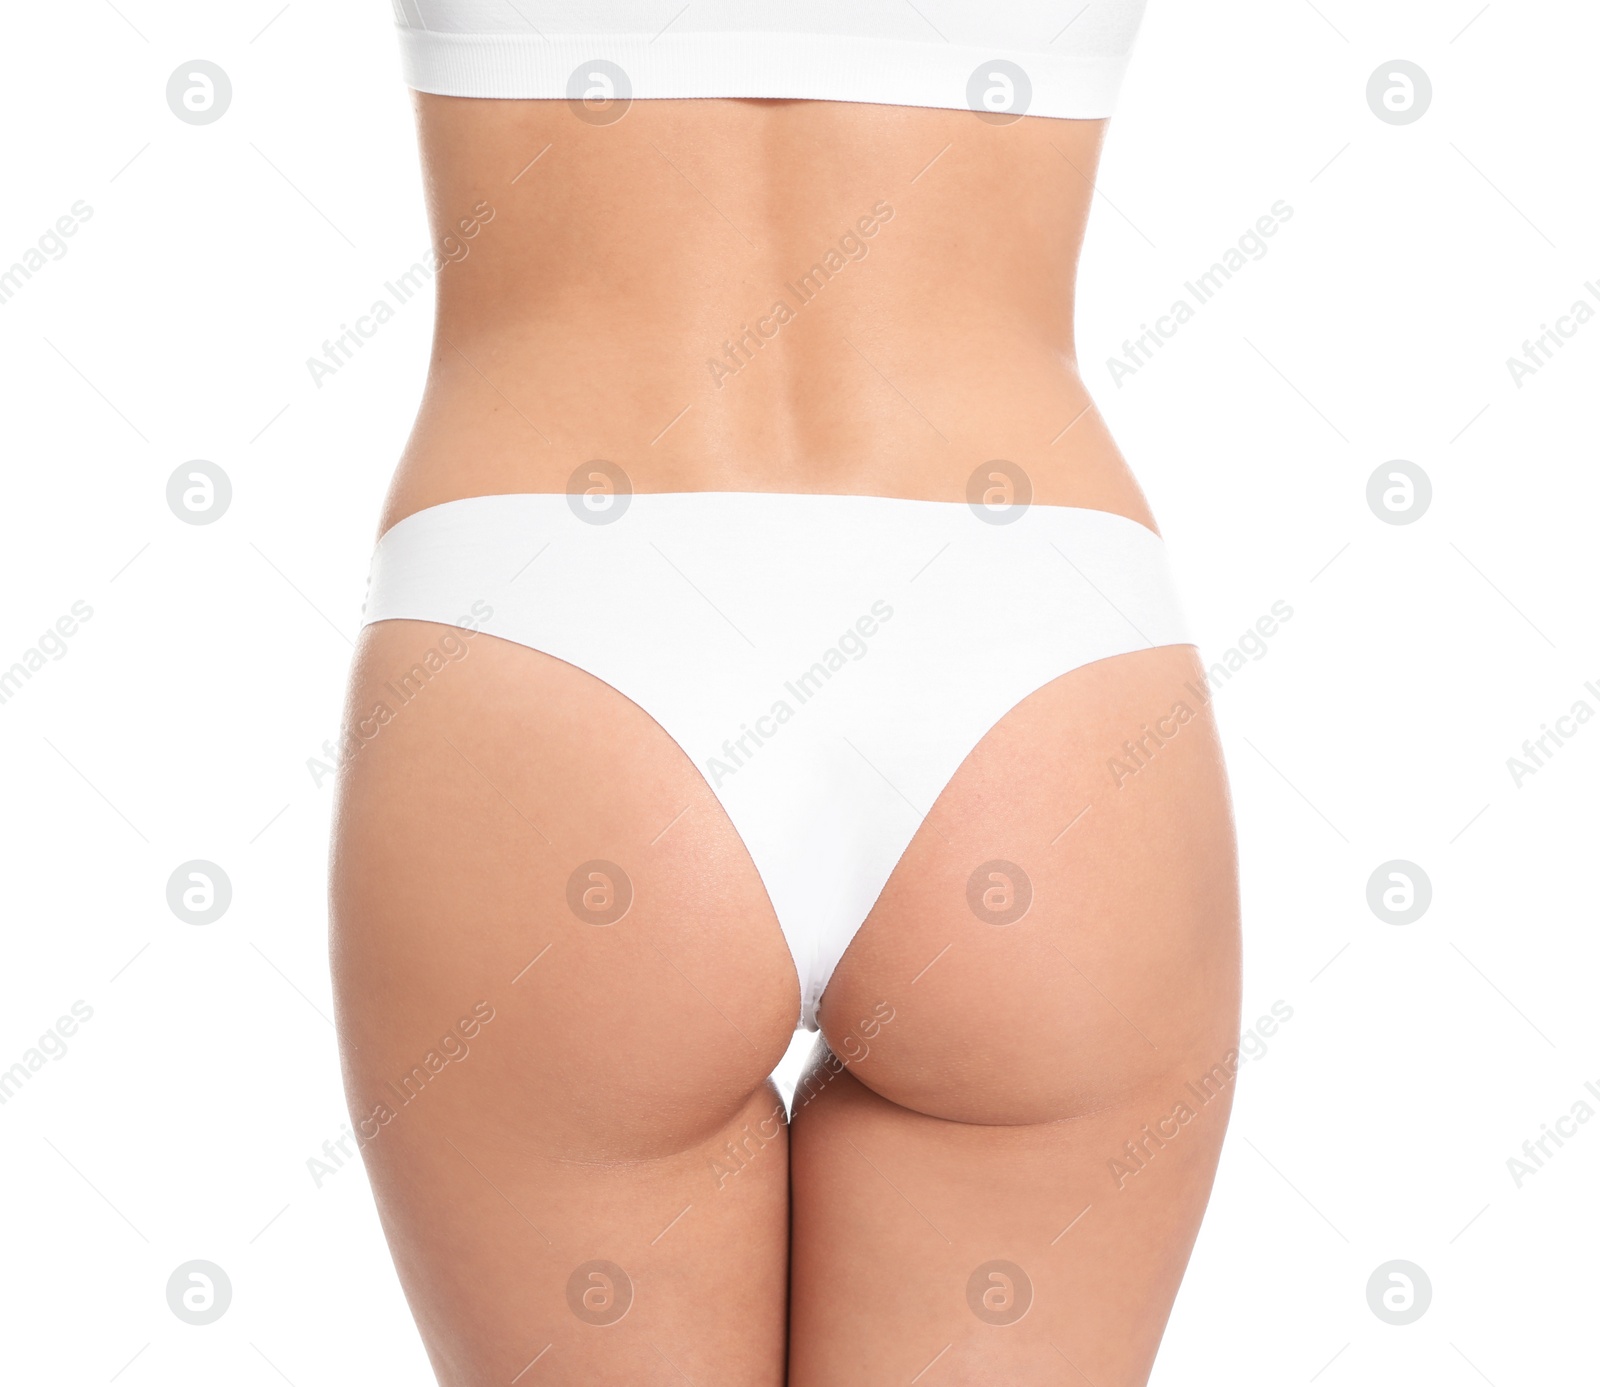 Photo of Slim young woman with smooth gentle skin on white background, closeup. Beauty and body care concept